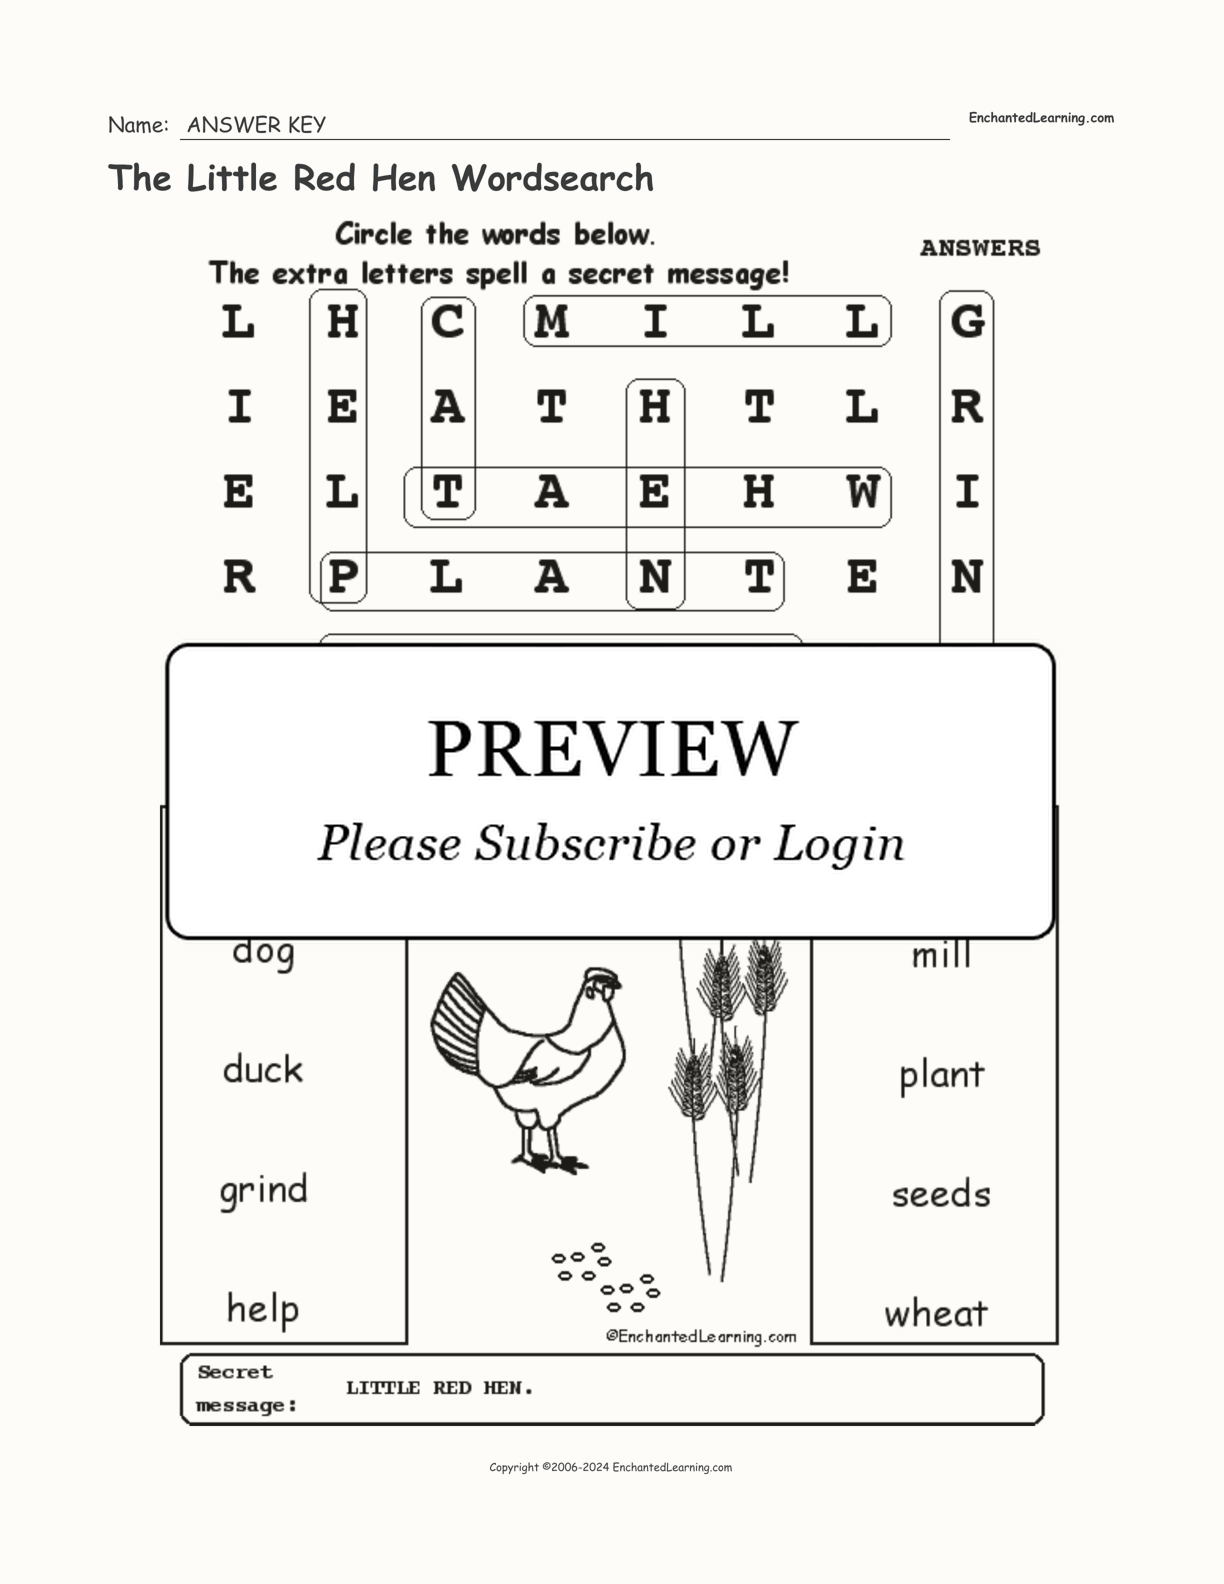 The Little Red Hen Wordsearch interactive worksheet page 2